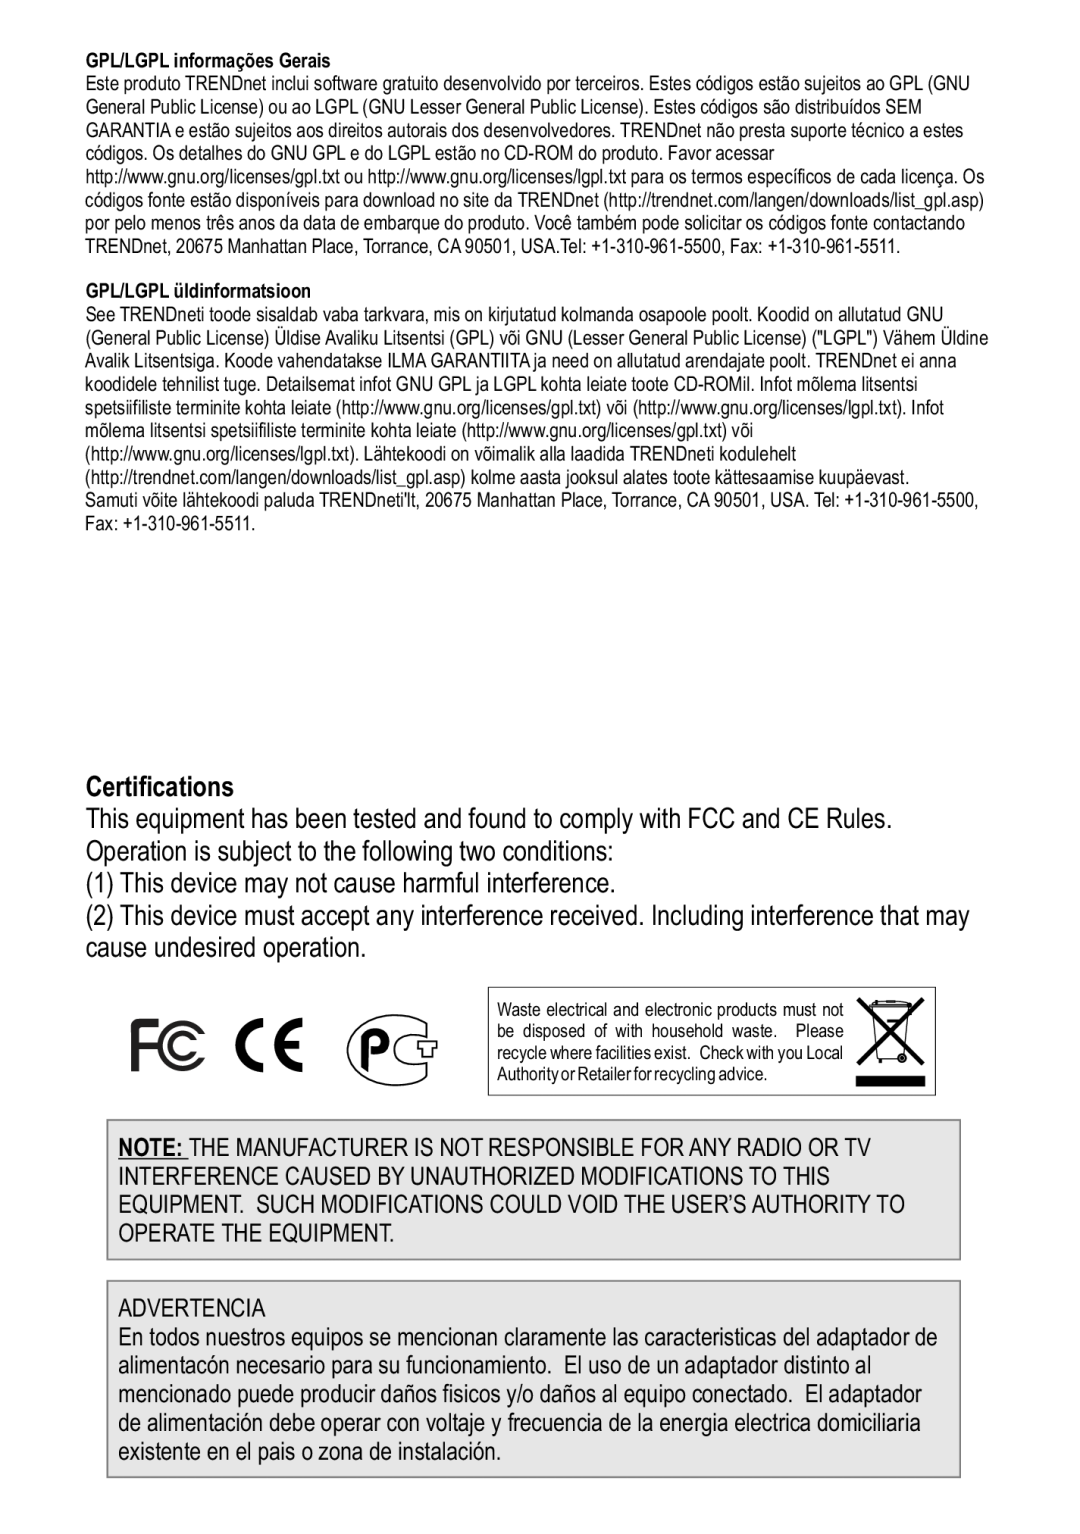 TRENDnet TEW653AP manual Certifications, This device may not cause harmful interference 